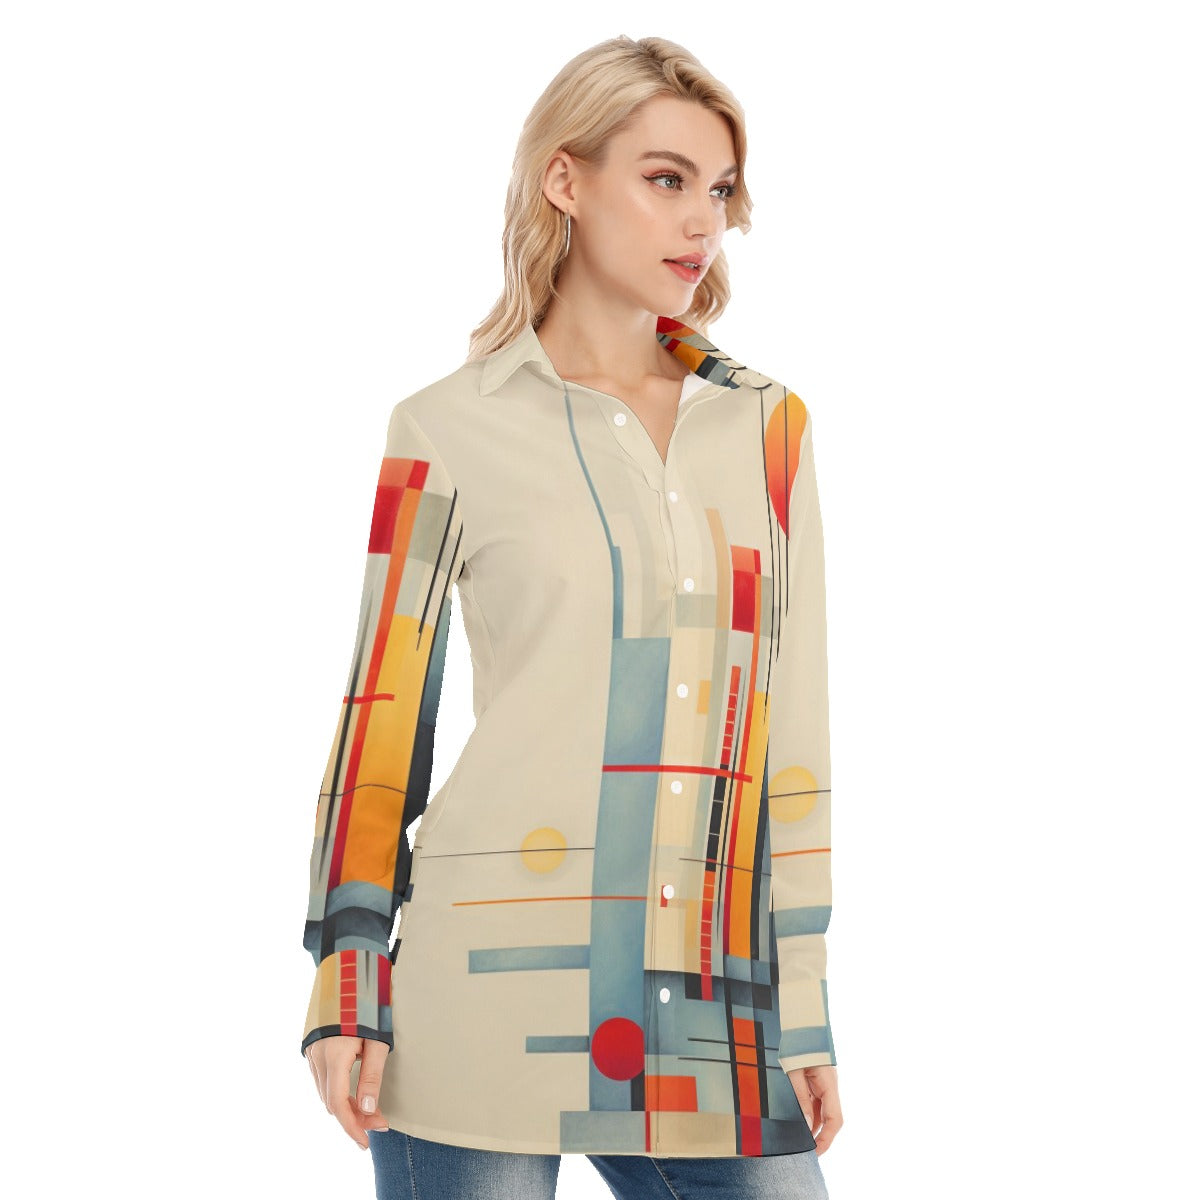 3R9G7 All-Over Print Women's Long Shirt |115GSM 98% Cotton and 2% spandex